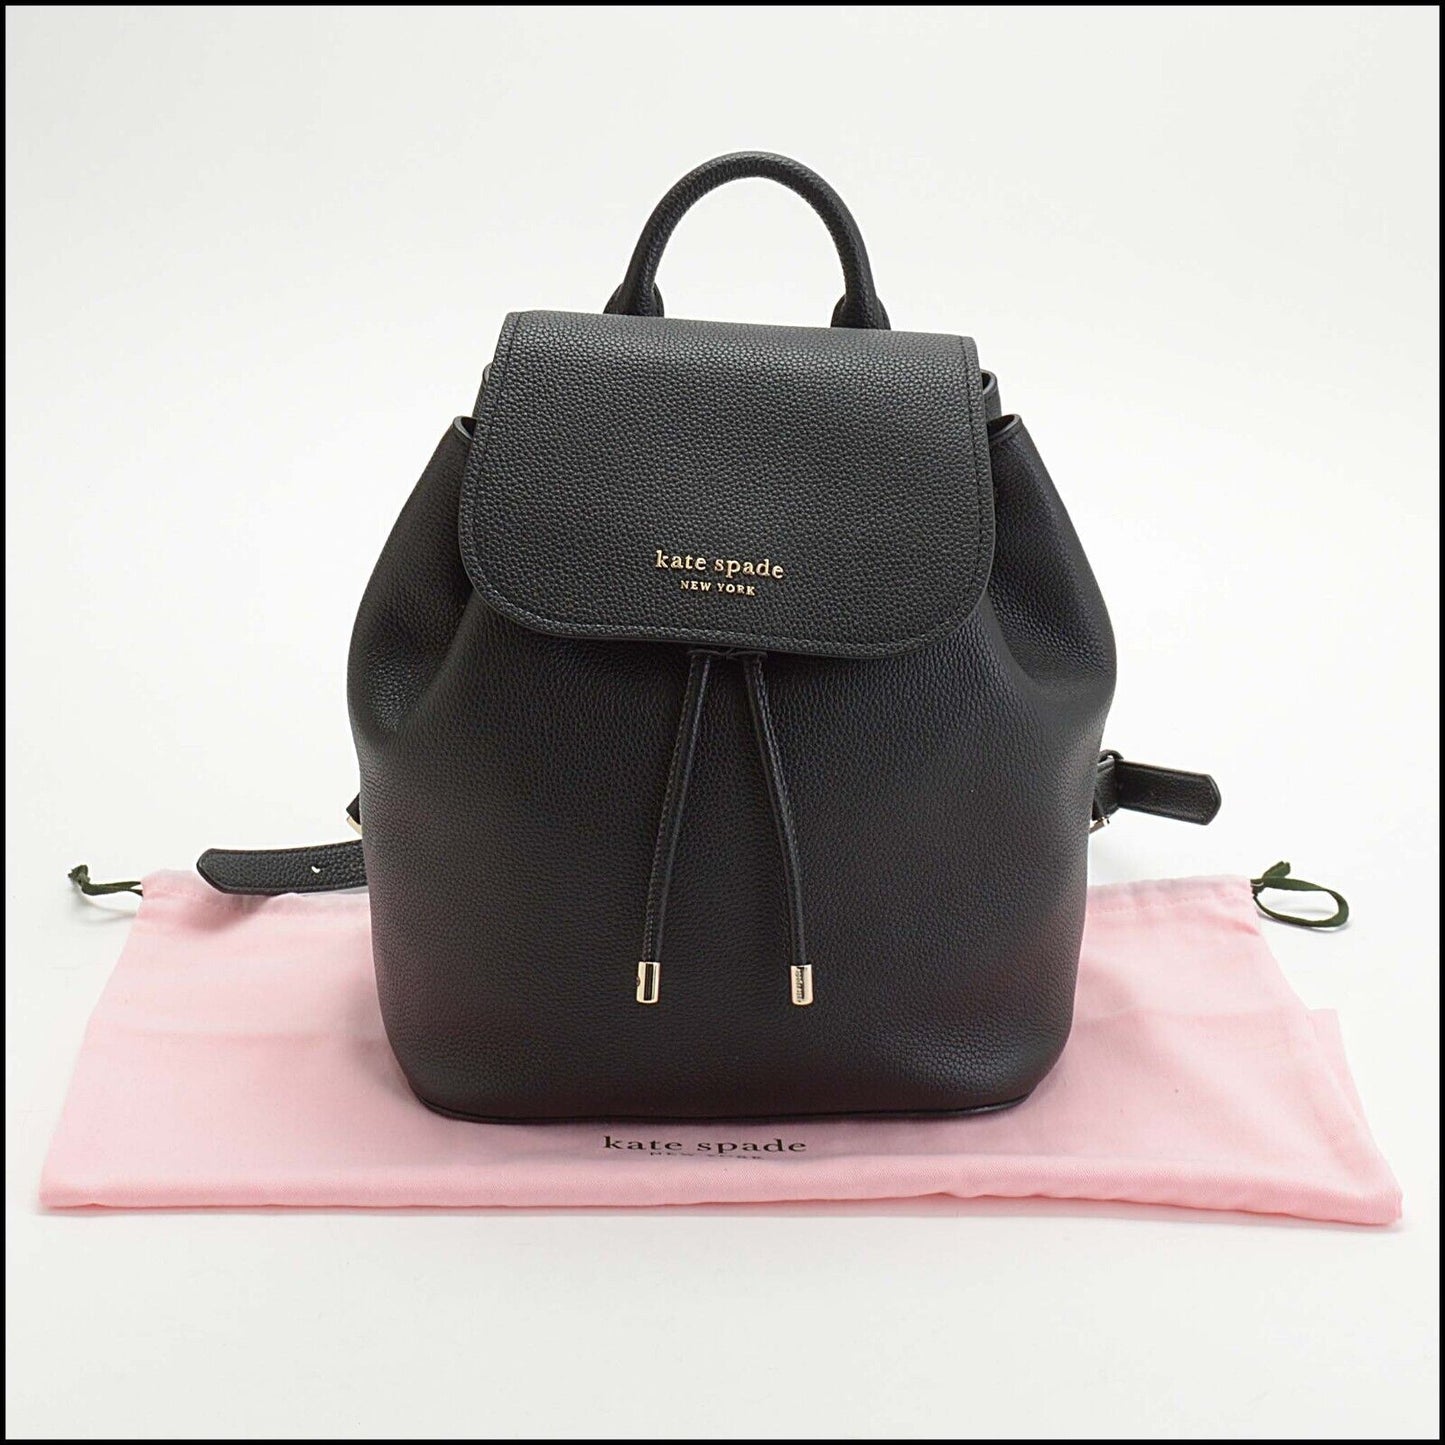 RDC13705 Authentic KATE SPADE Black Pebbled Leather Small Breezy Backpack